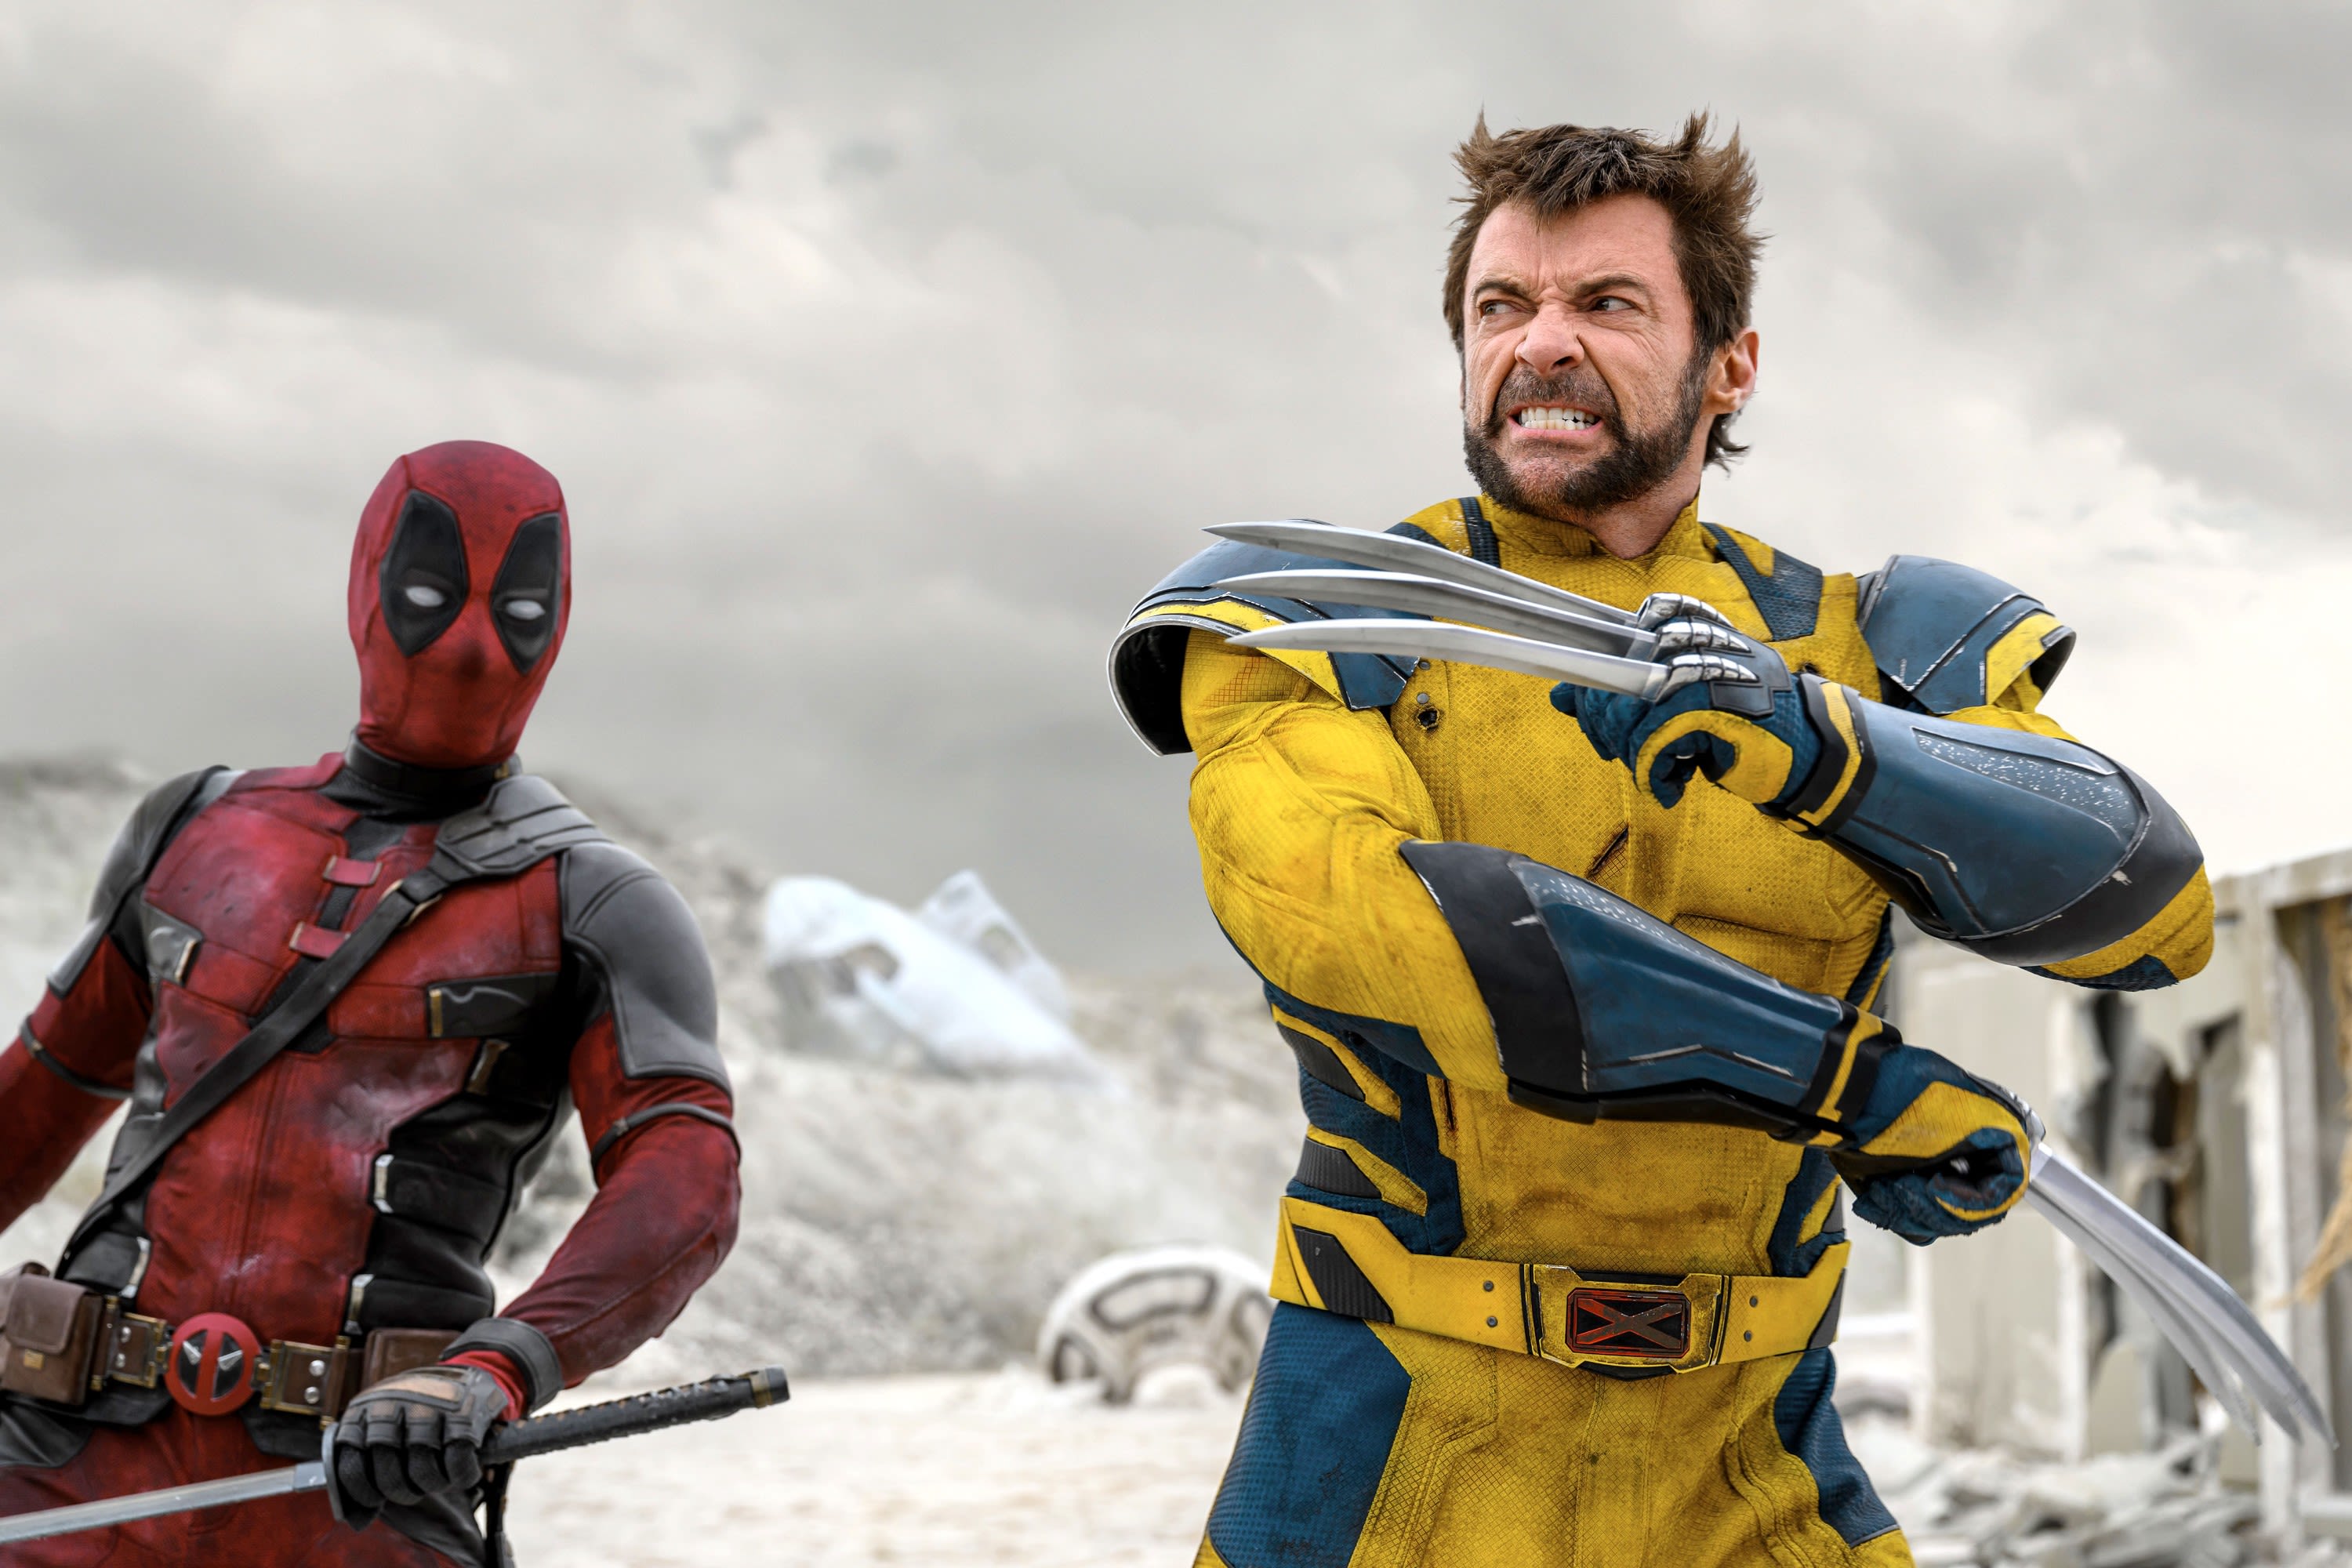 ‘Deadpool & Wolverine’ Crossing $200M+ After Marvel’s Epic Comic-Con Panel; Unprecedented For R-Rated Film – Sunday AM Update